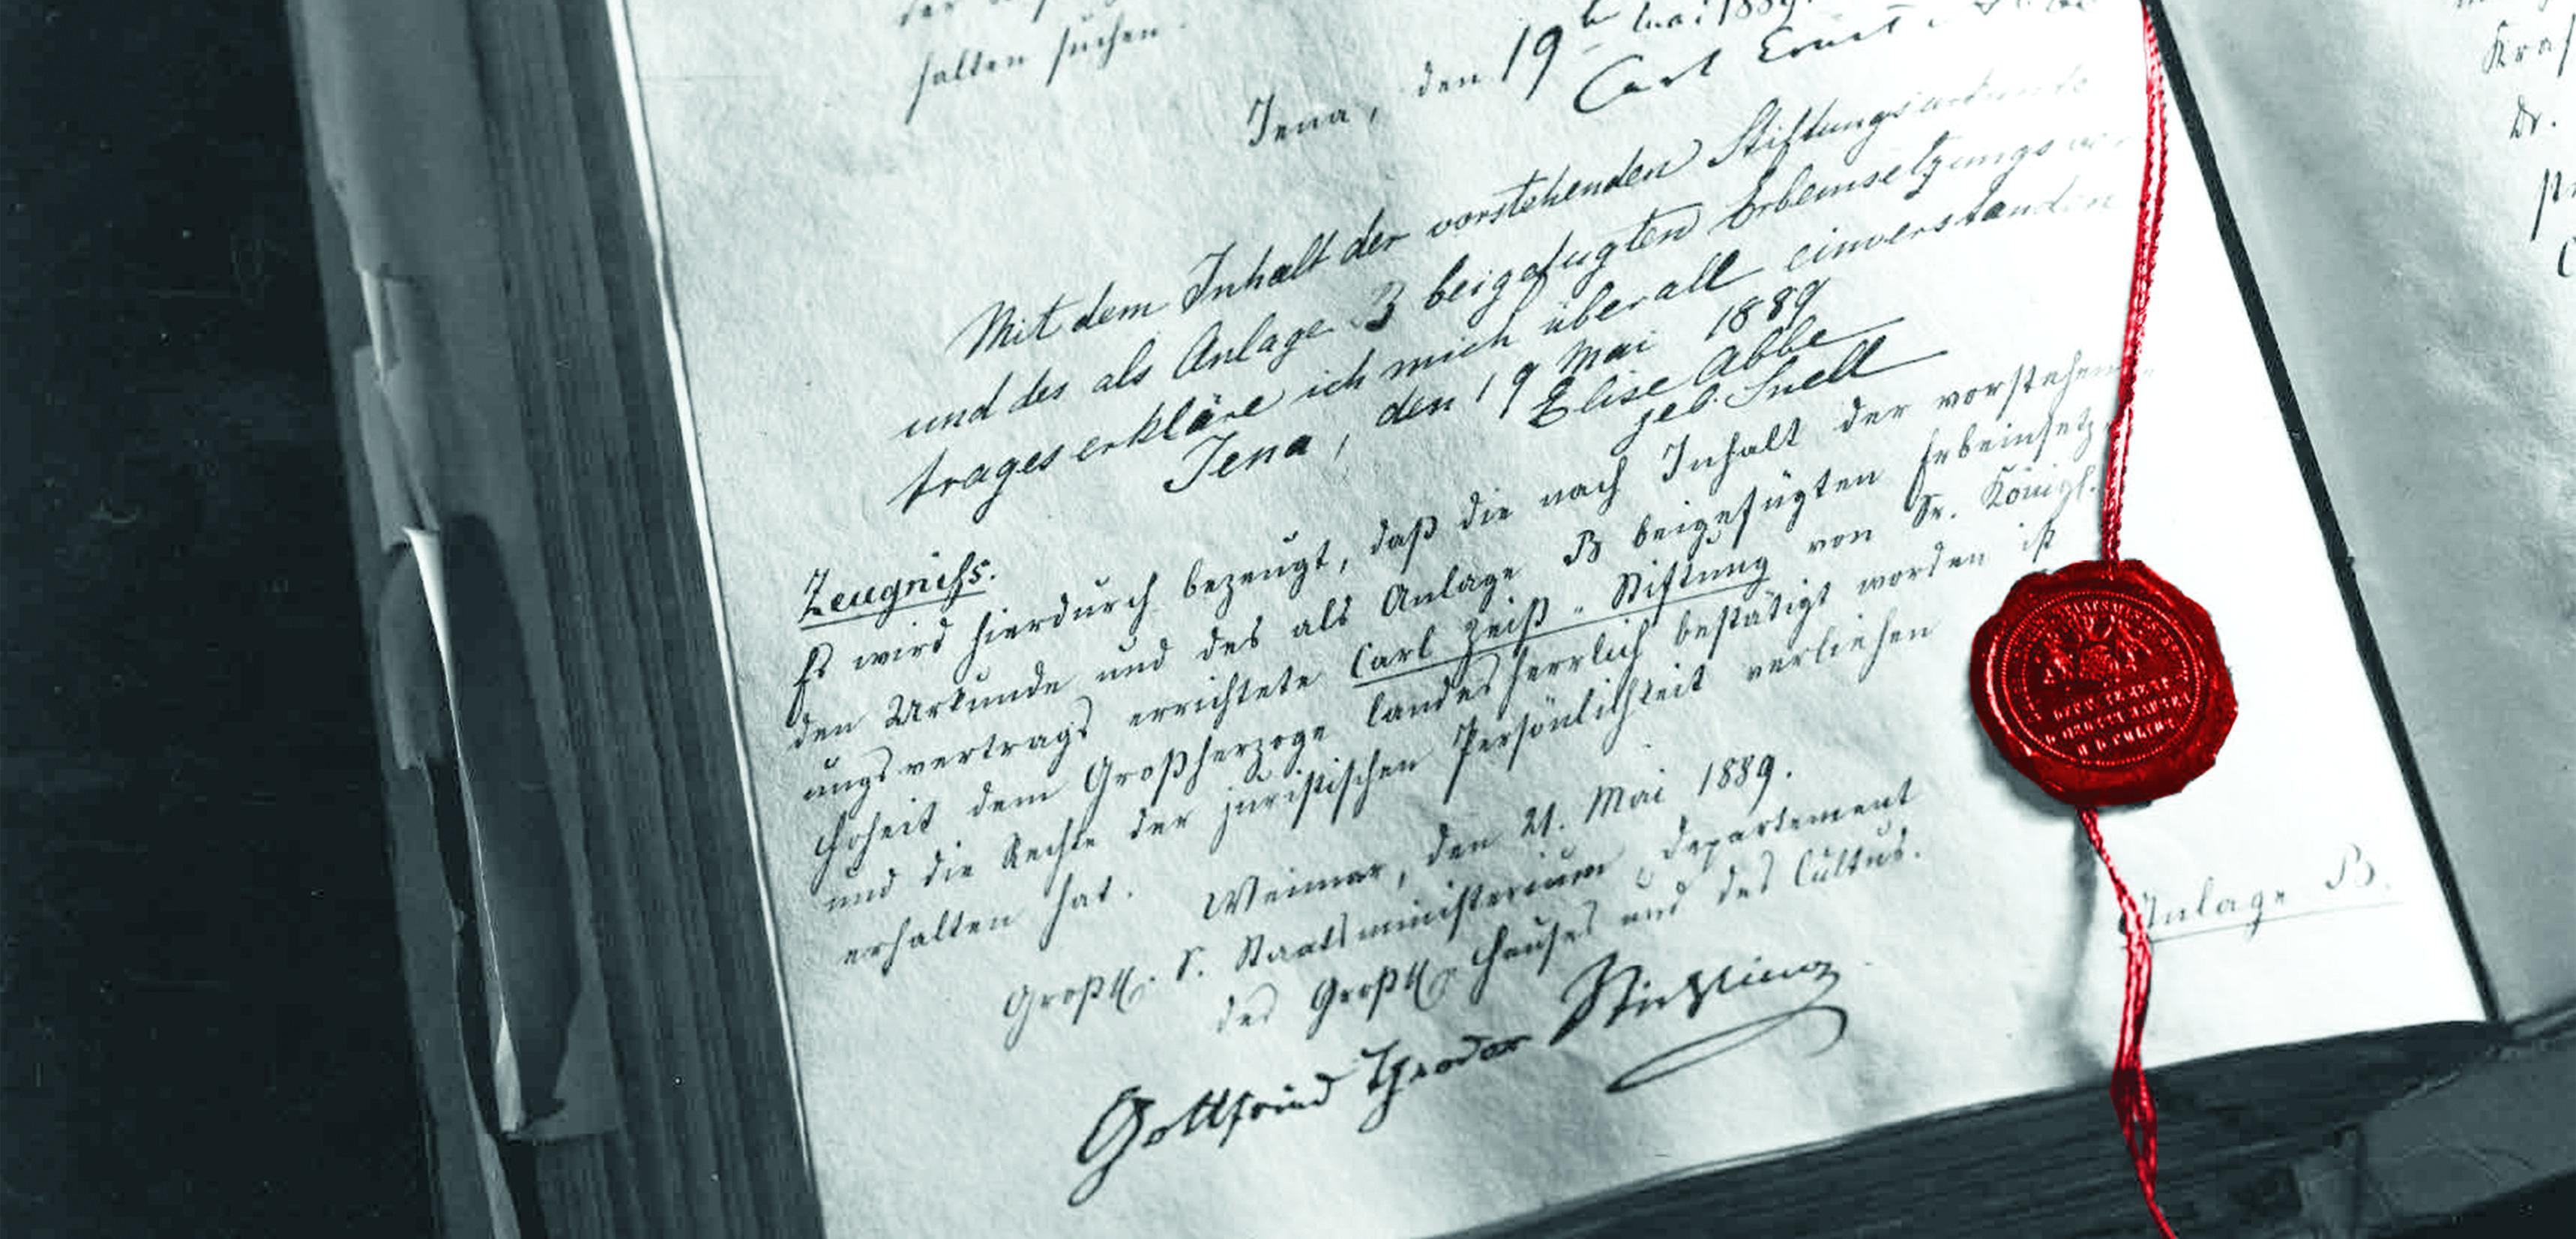 Deed for the formation of the Carl Zeiss Foundation